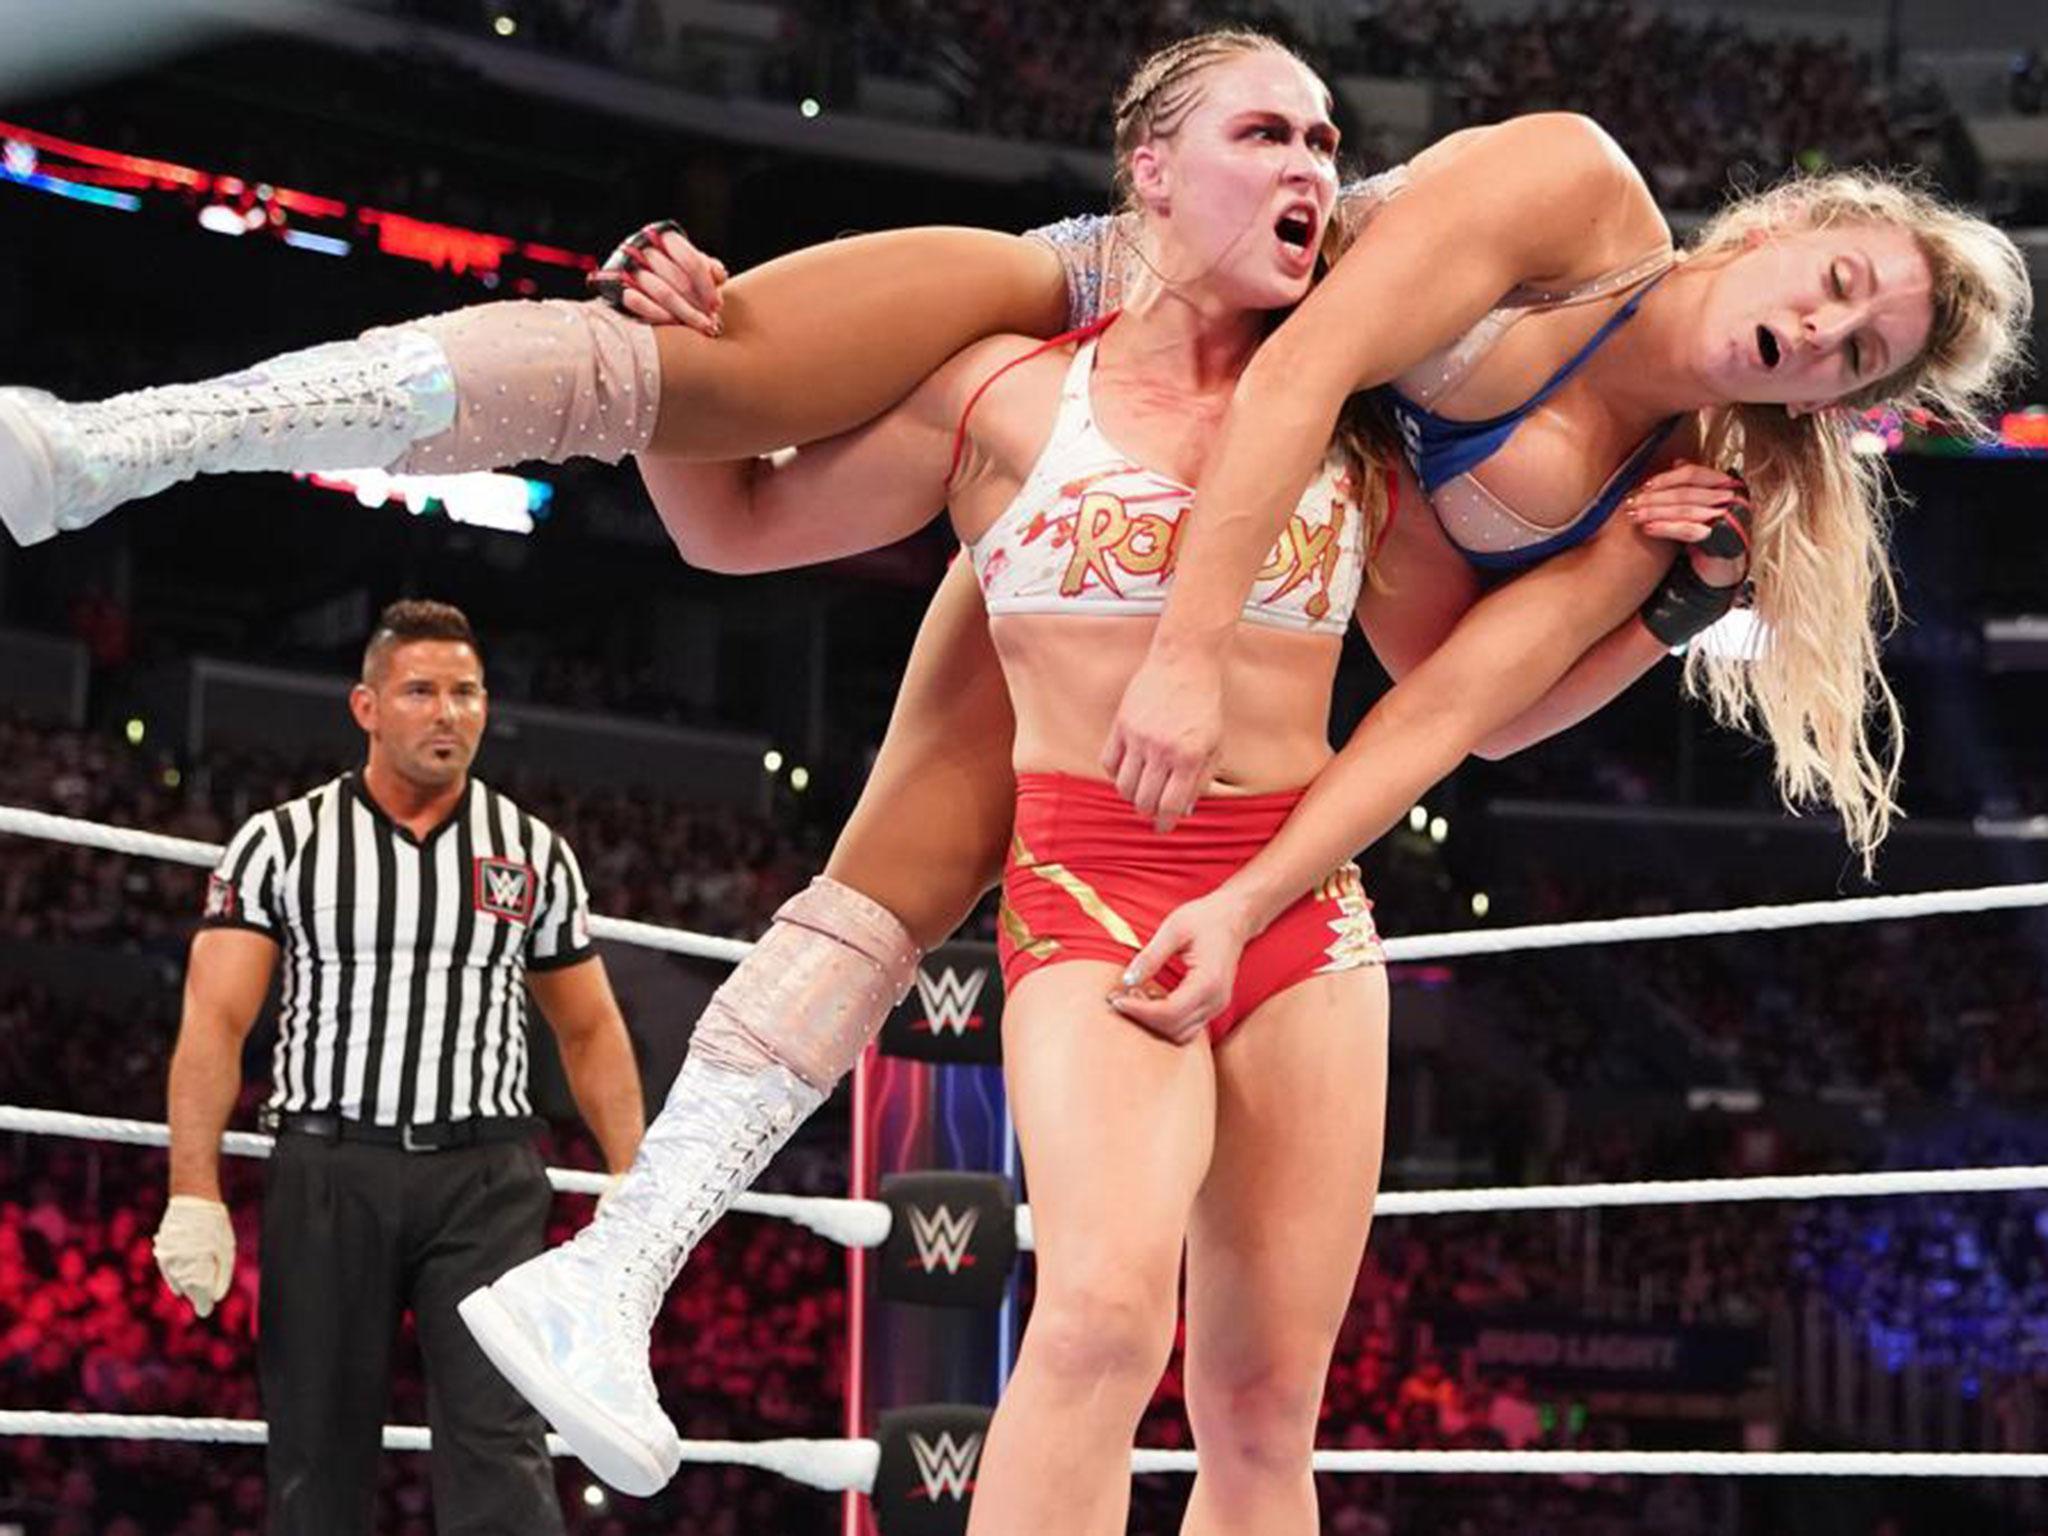 Wwe sex pic all